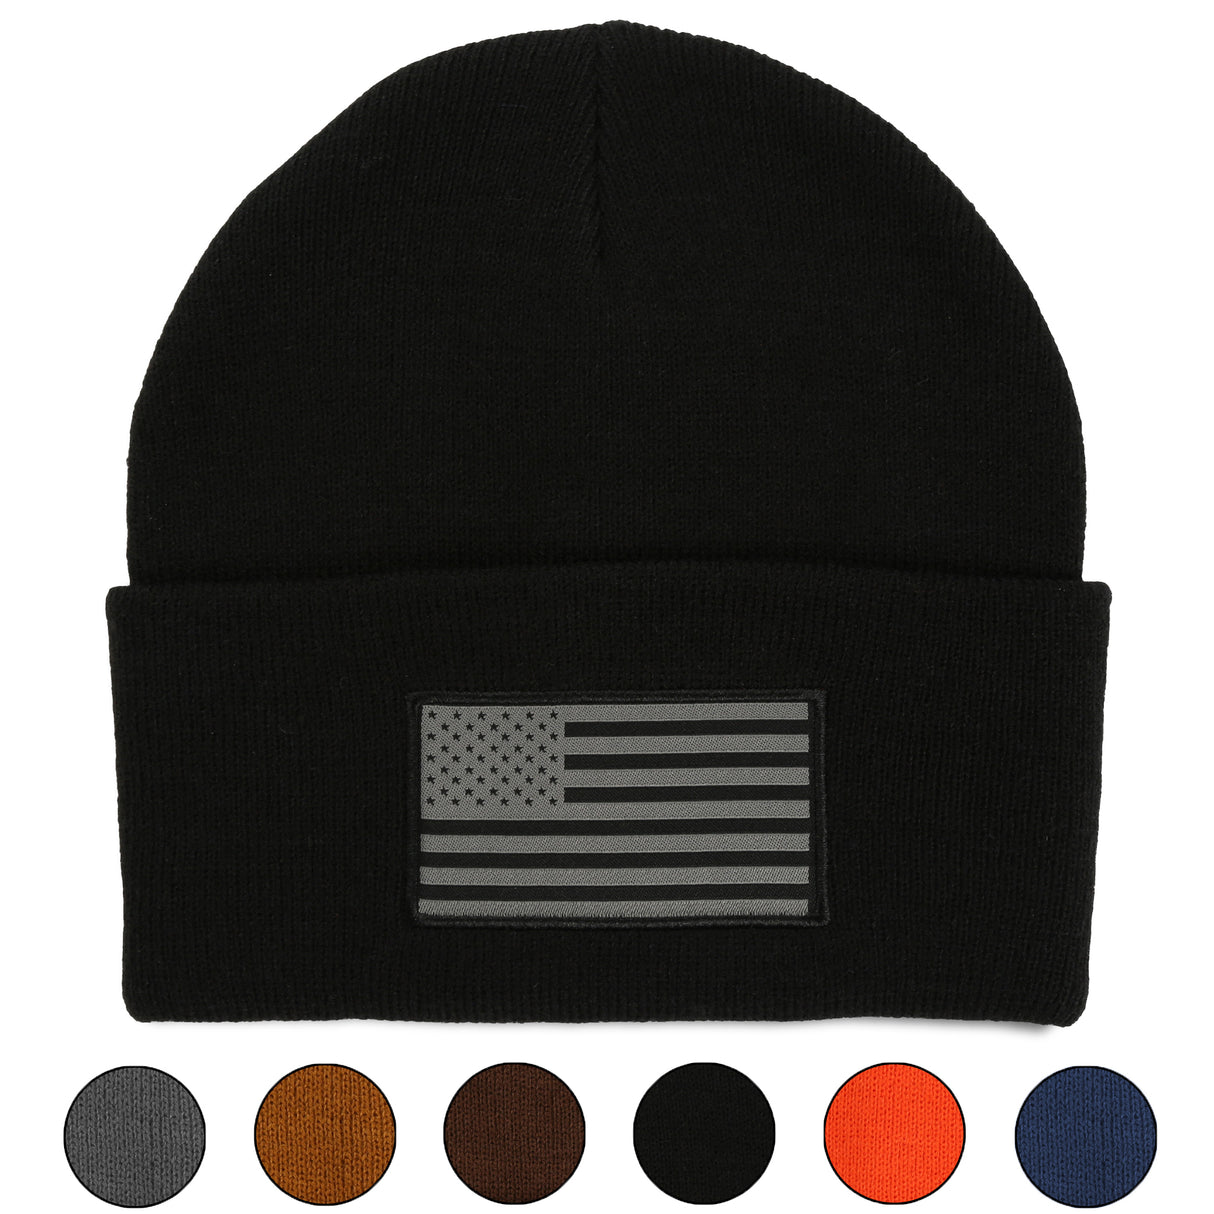 Paramount Outdoors American Flag Beanie